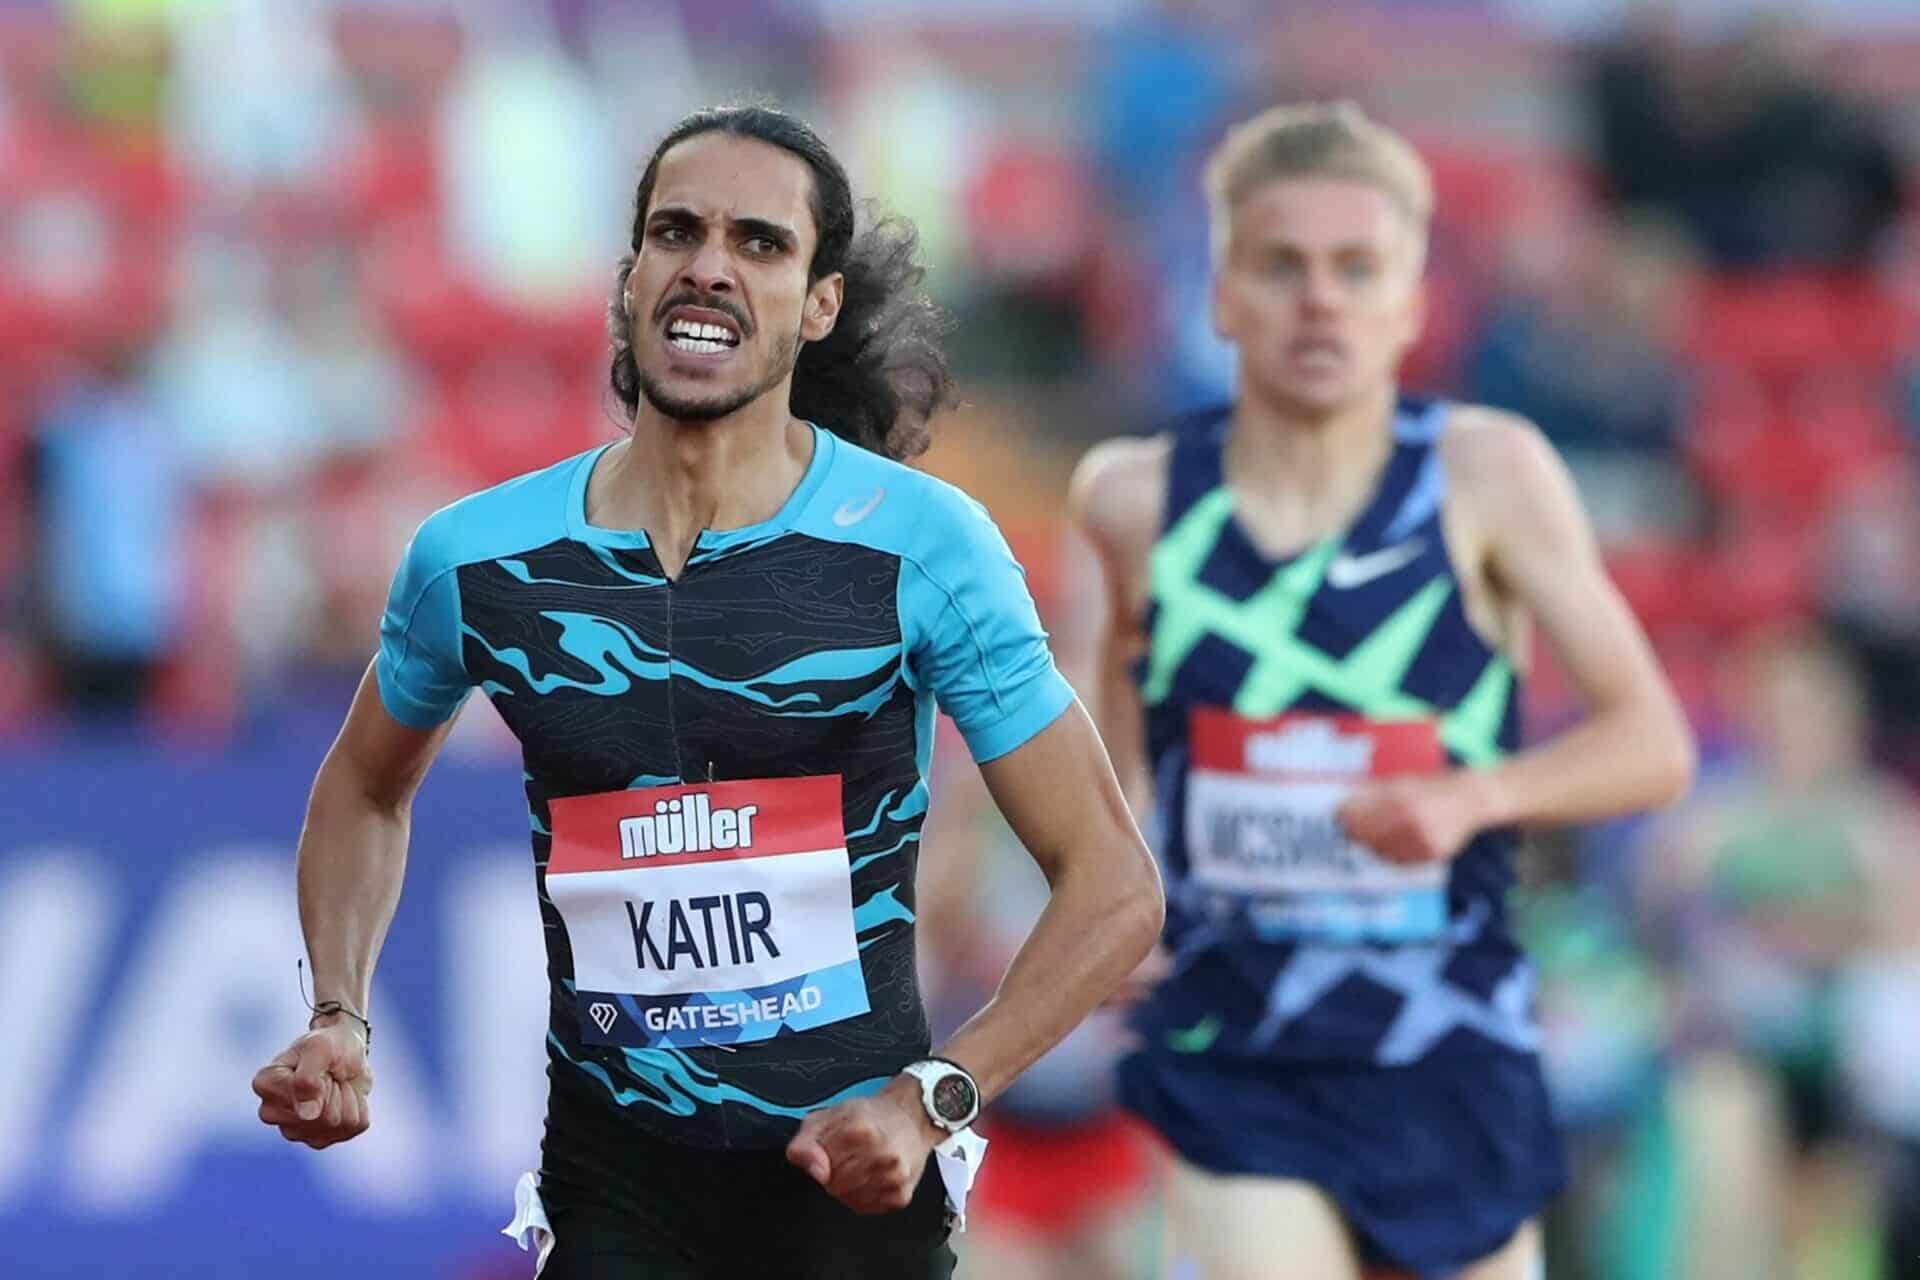 spains mohamed katir on his way to winning the mens 3000m news photo 1626208210 scaled